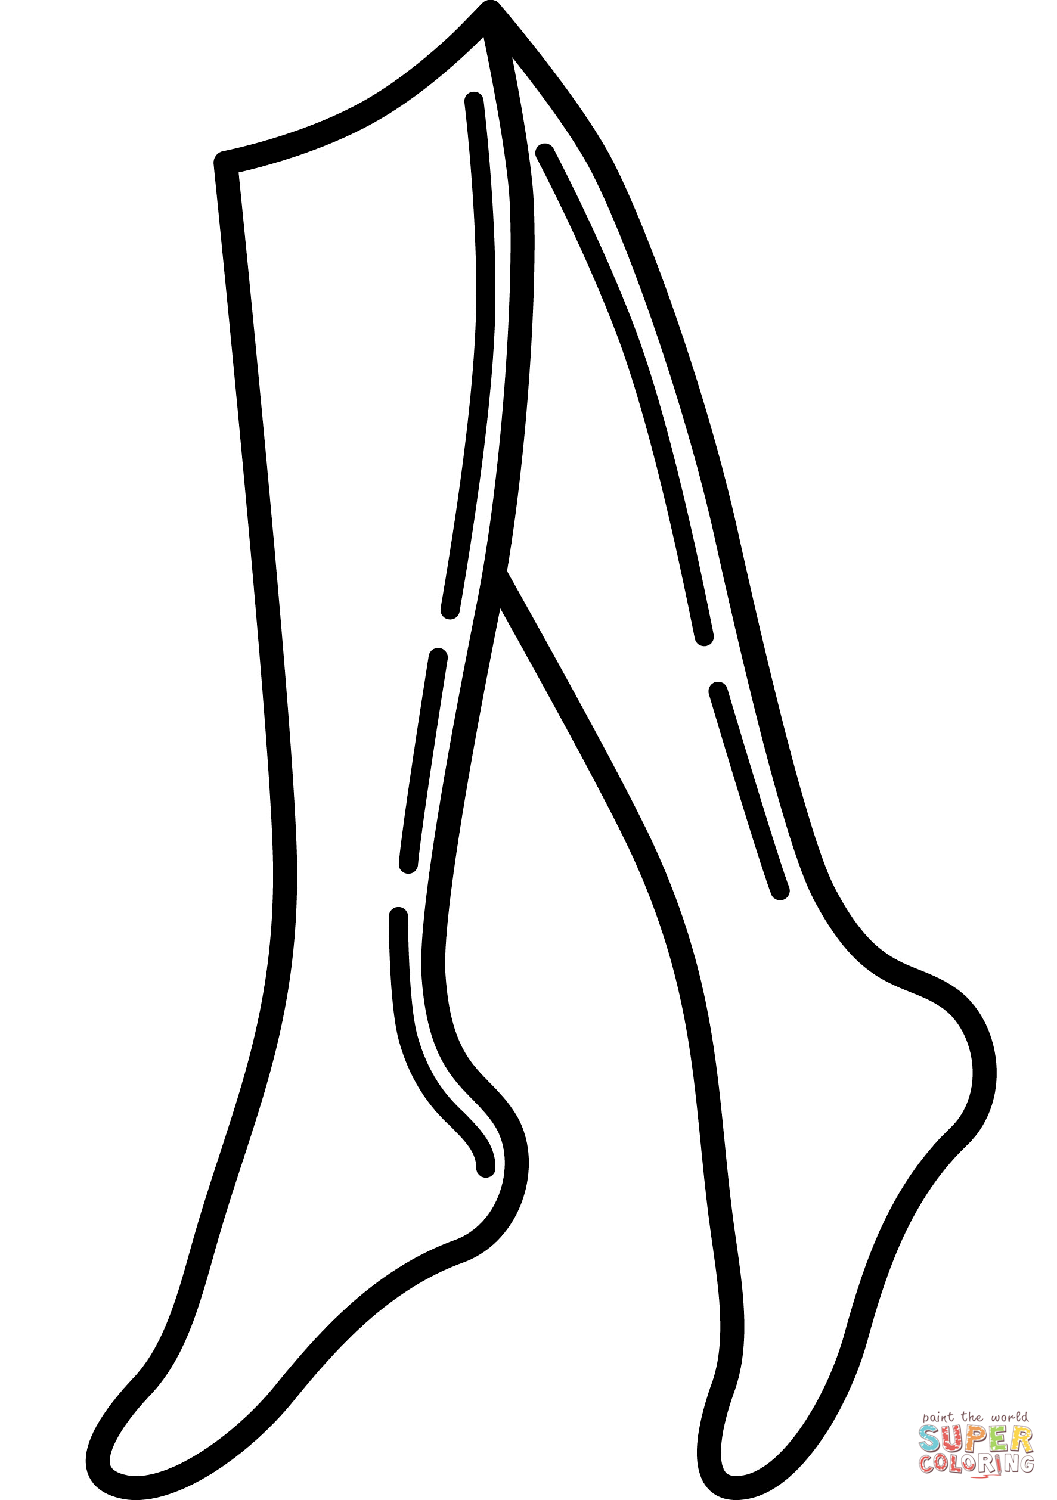 Leg coloring page | Free Printable Coloring Pages